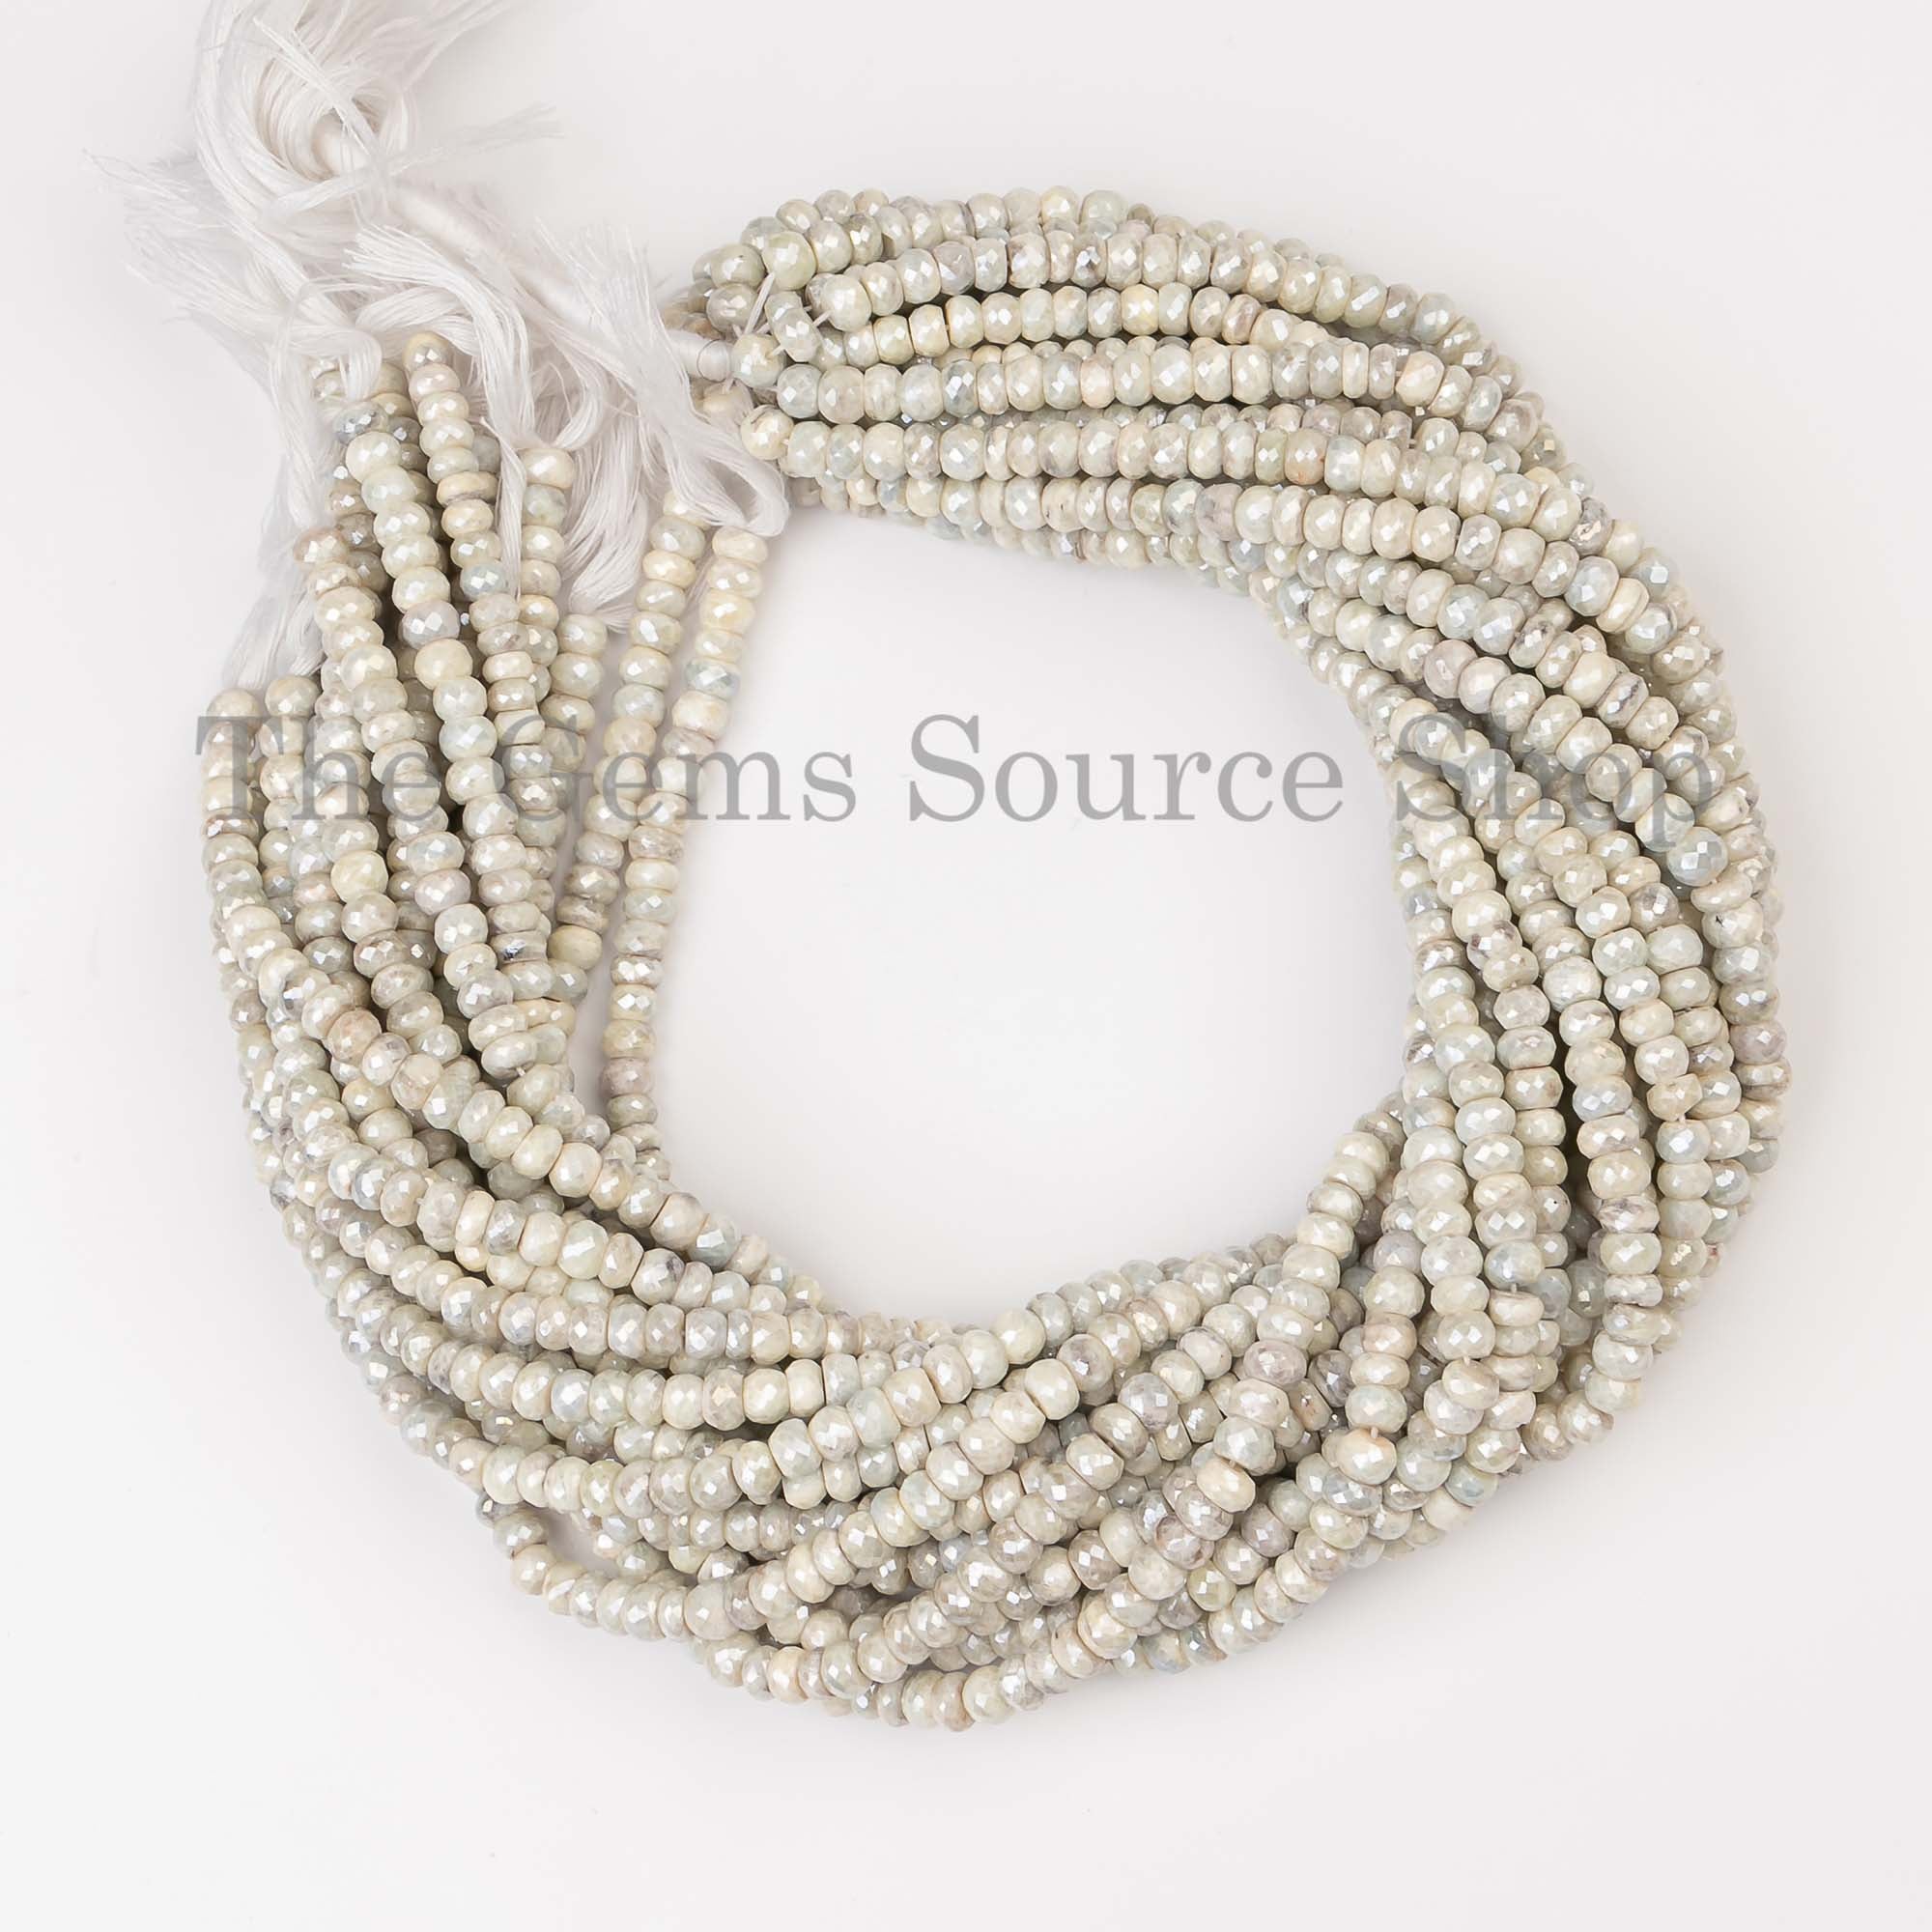 Silverite Coated Sapphire Faceted Rondelle Beads, Coated Sapphire Rondelle, Sapphire Faceted Beads